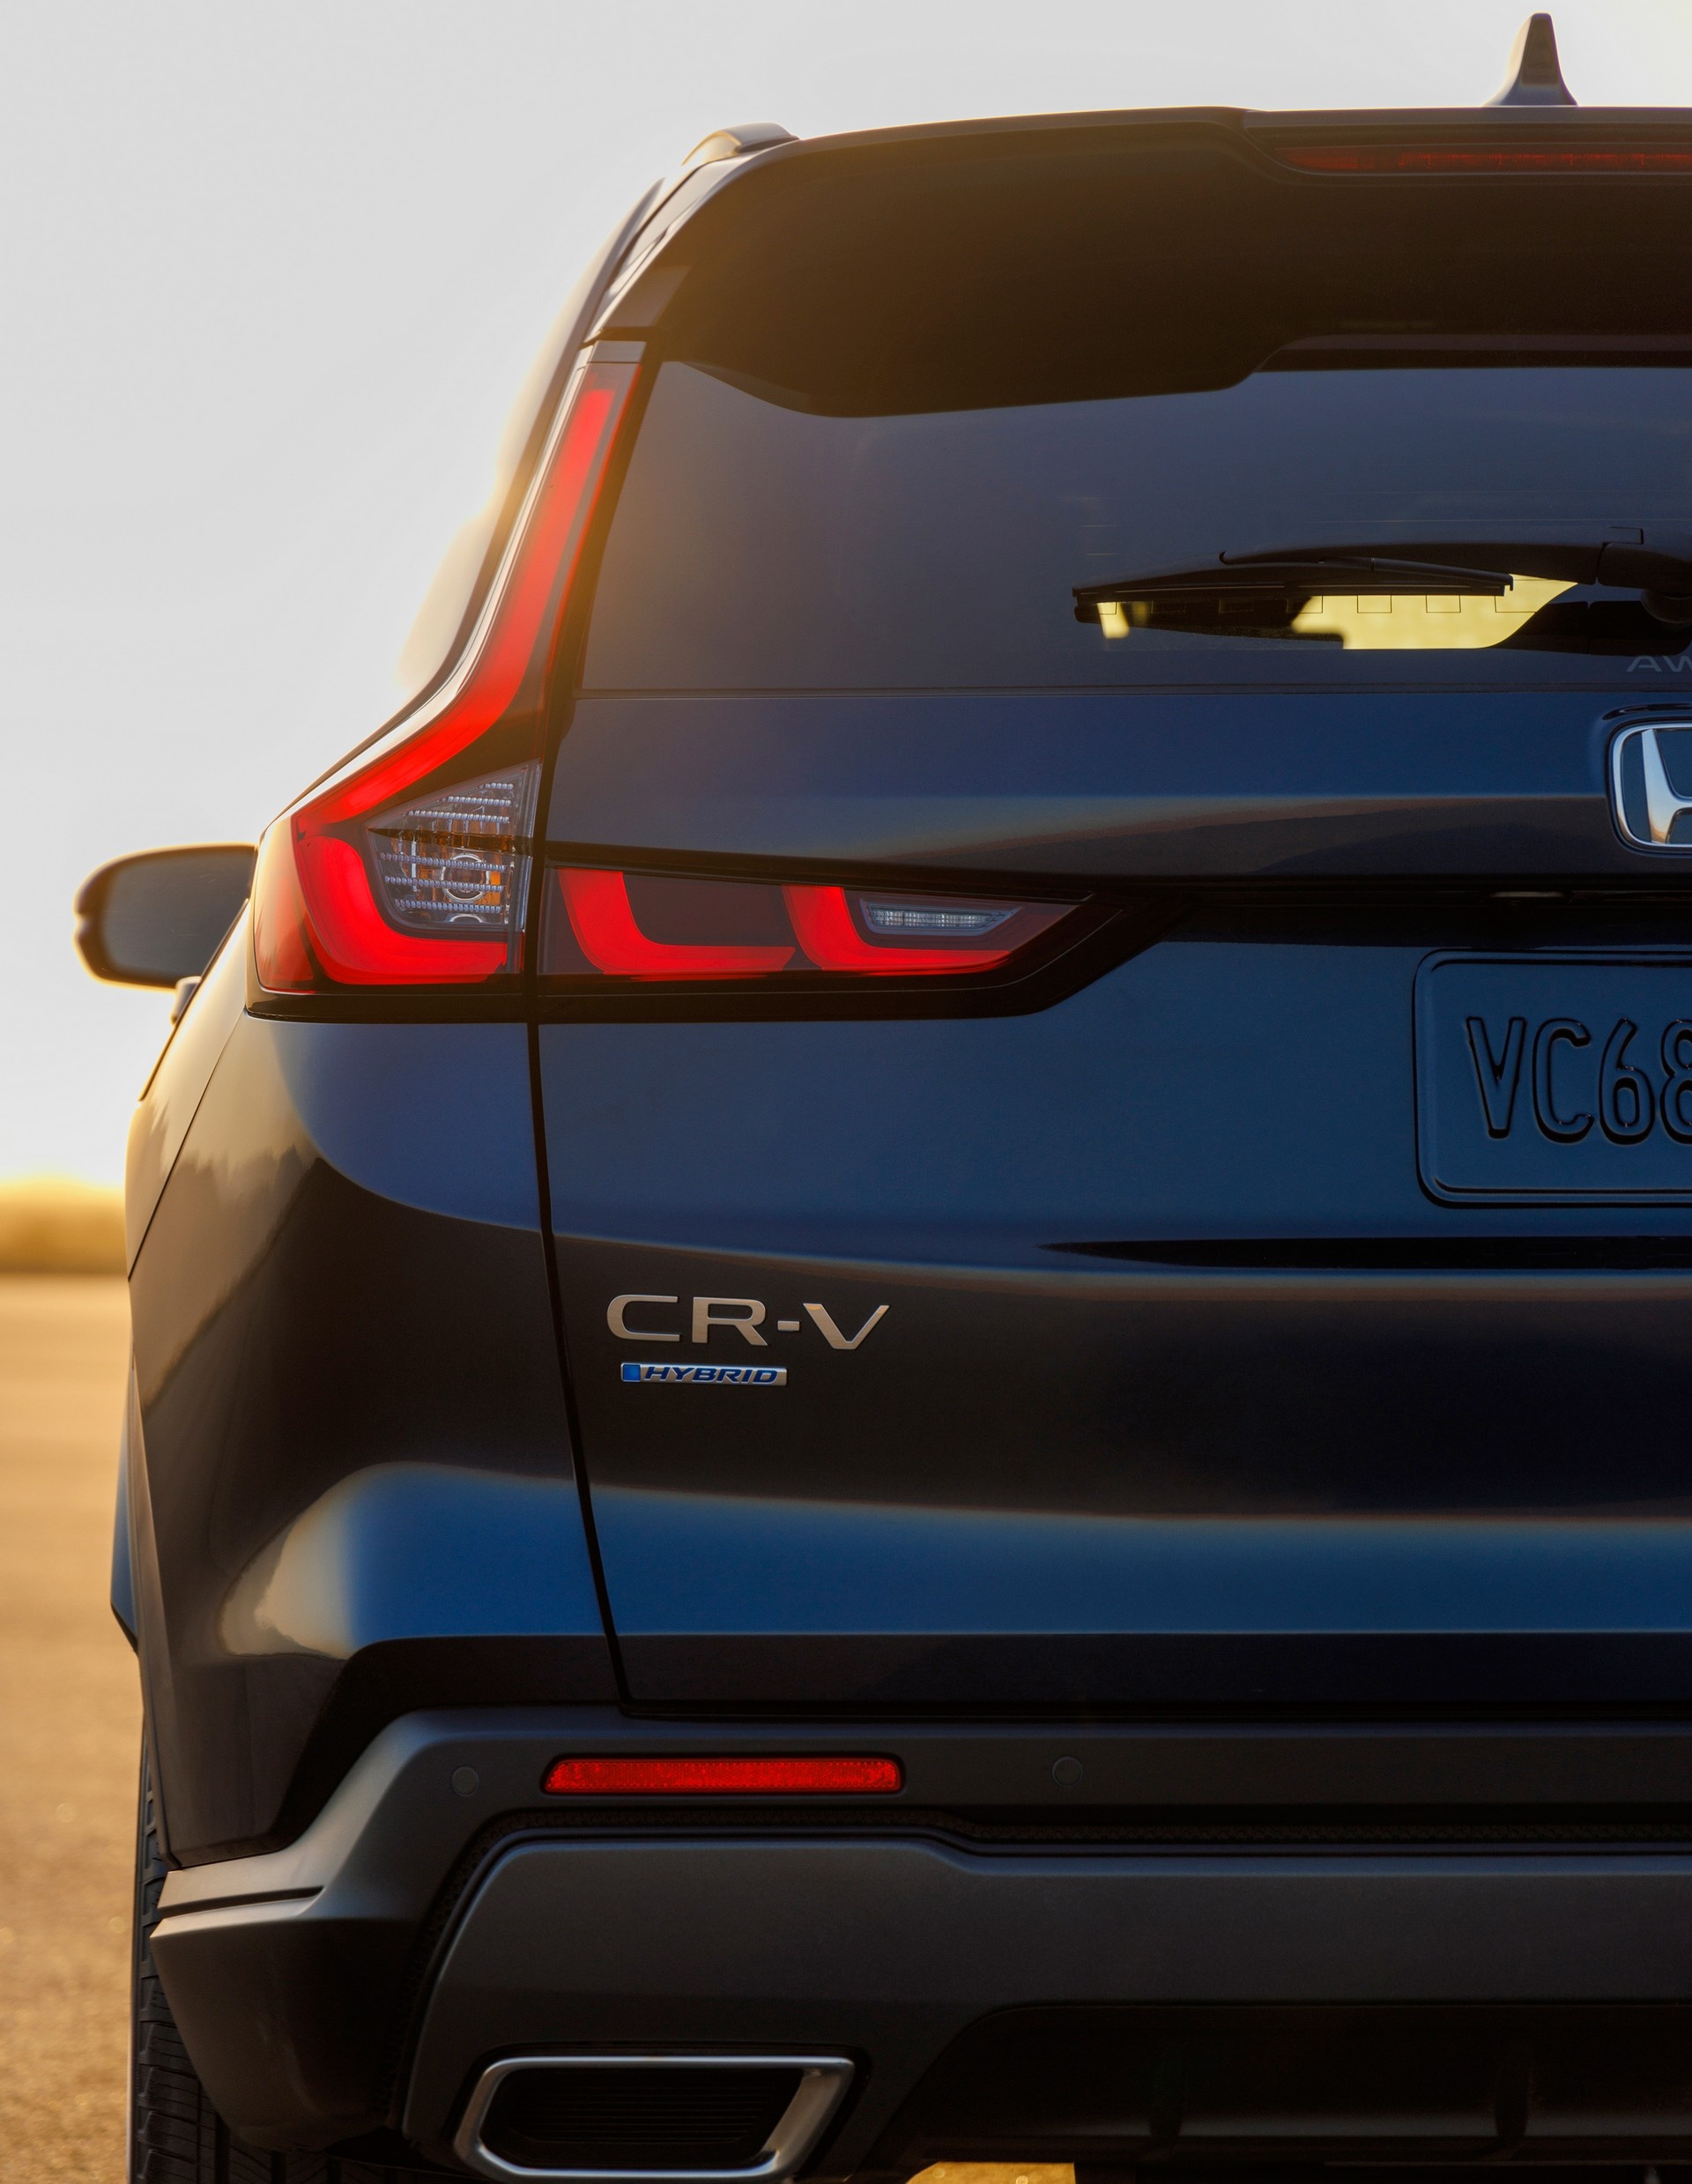 Honda CR-V, New model release, Exciting features, Futuristic design, 1920x2480 HD Handy